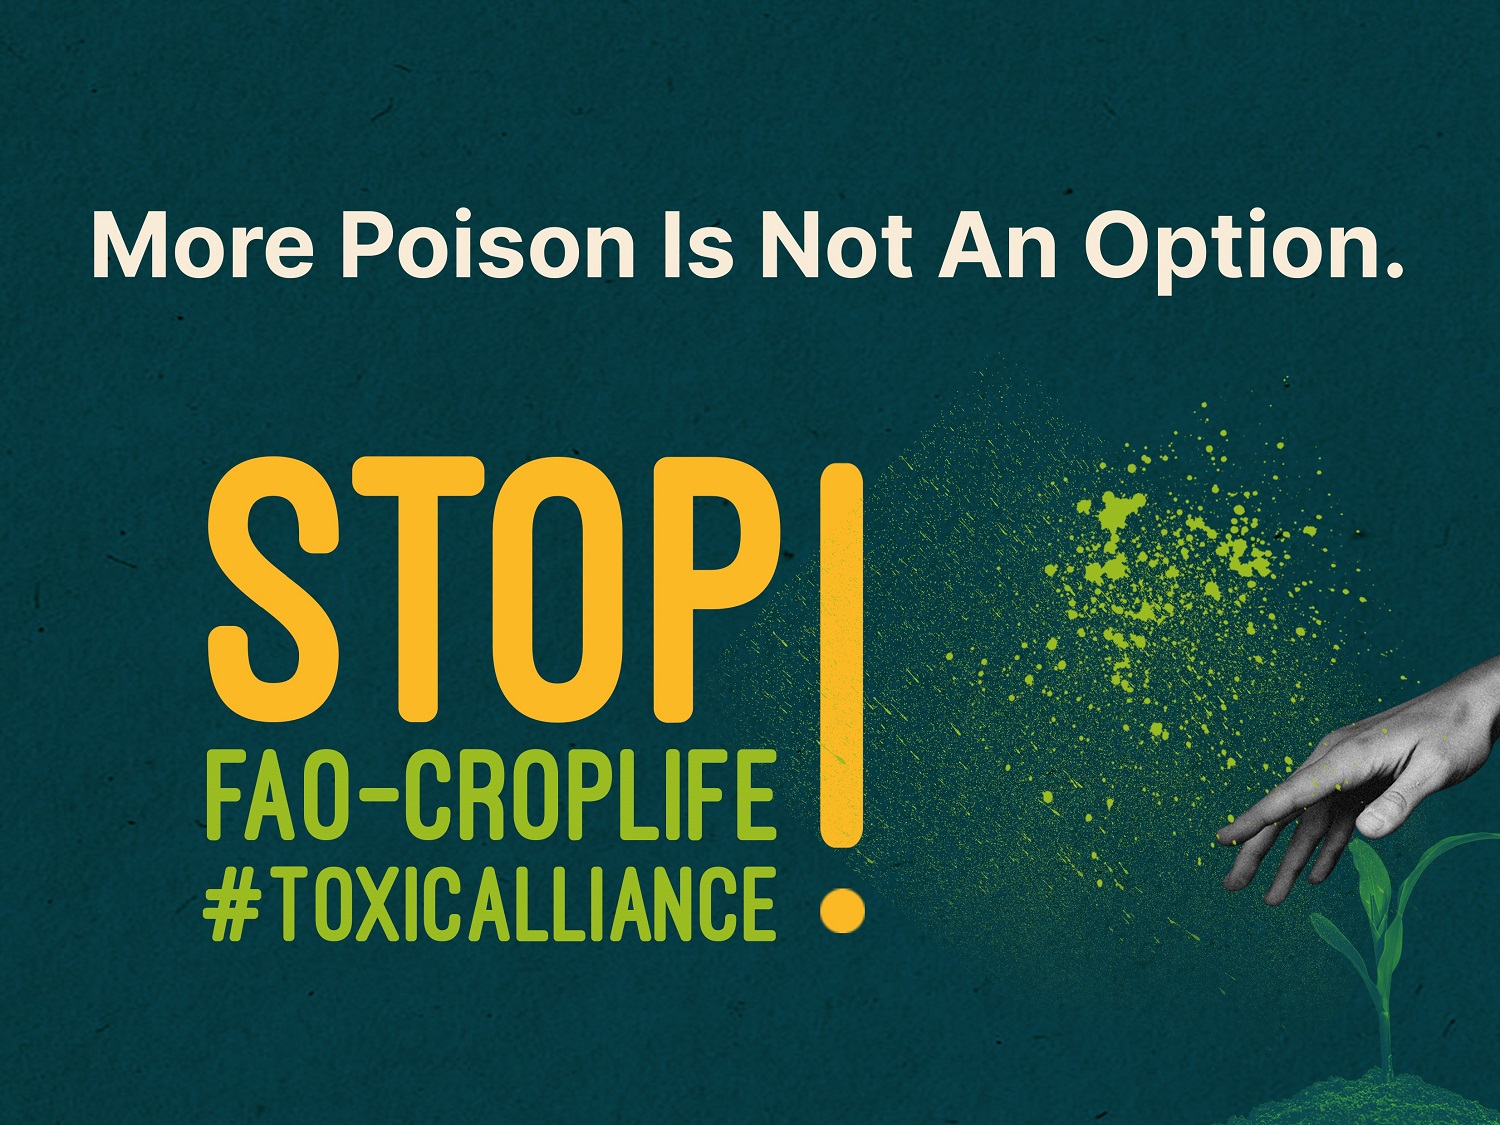 End toxic alliance between FAO and CropLife